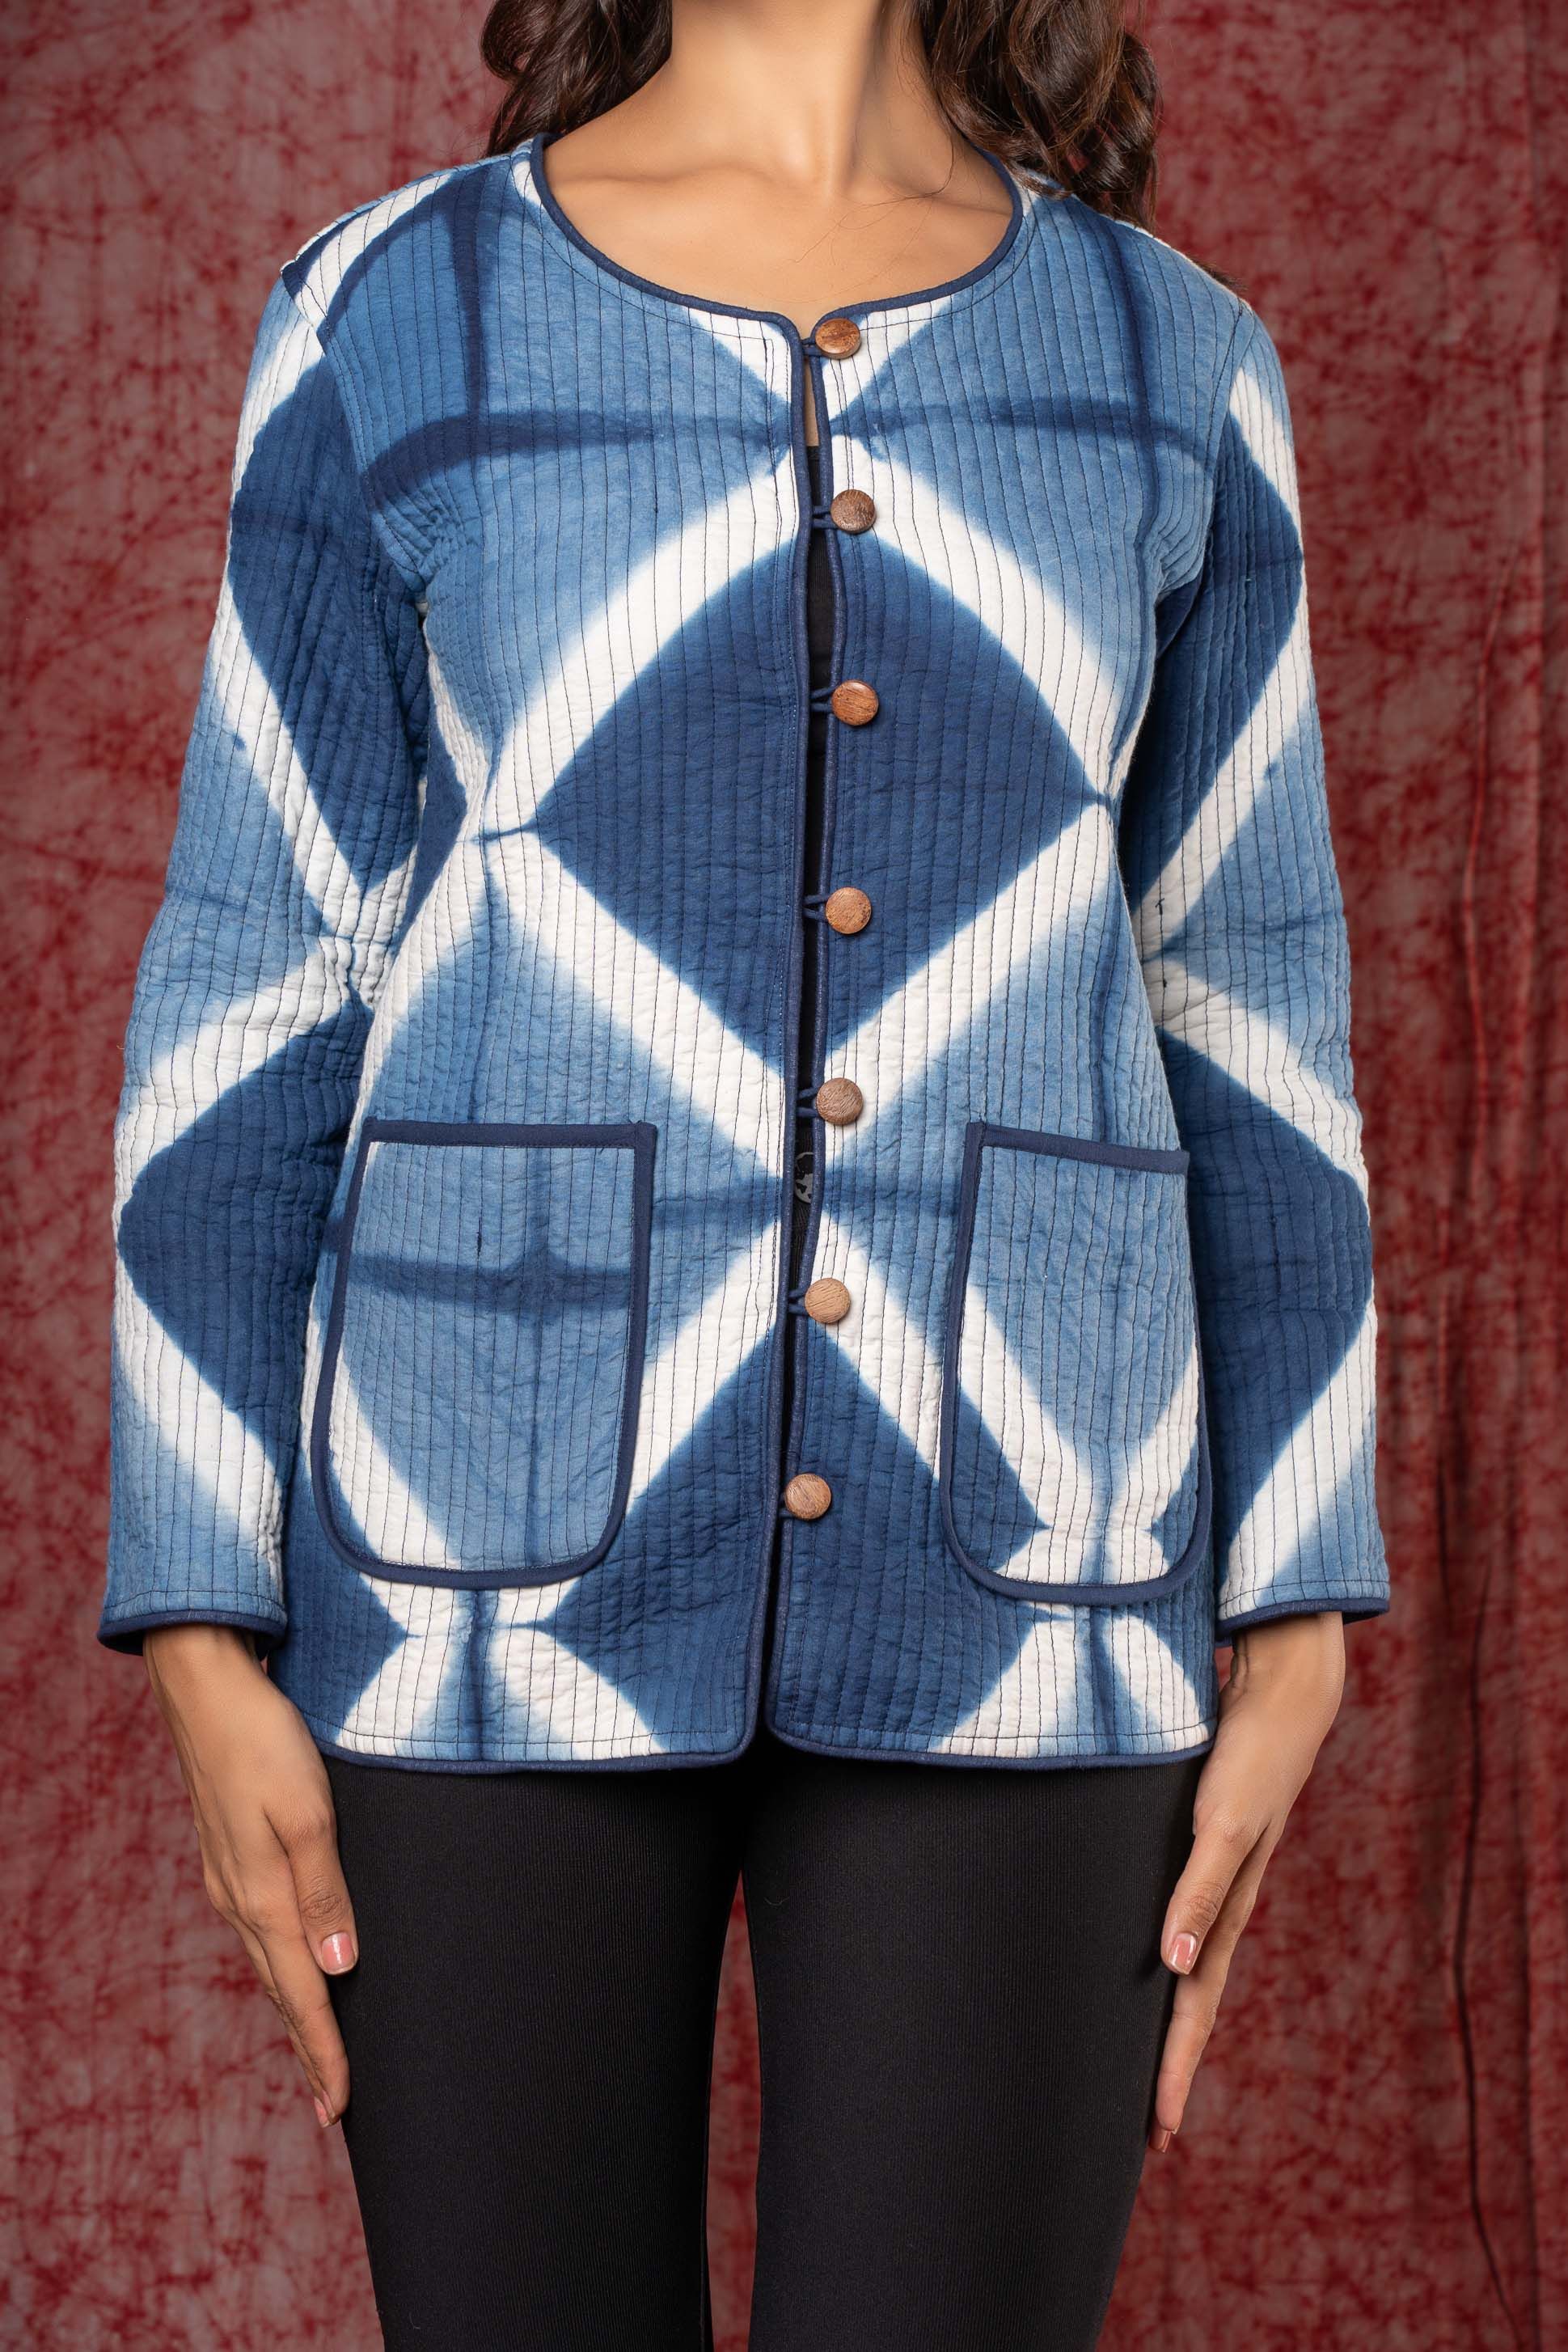 Blue White Reversible Quilted Clamp Dye Jacket